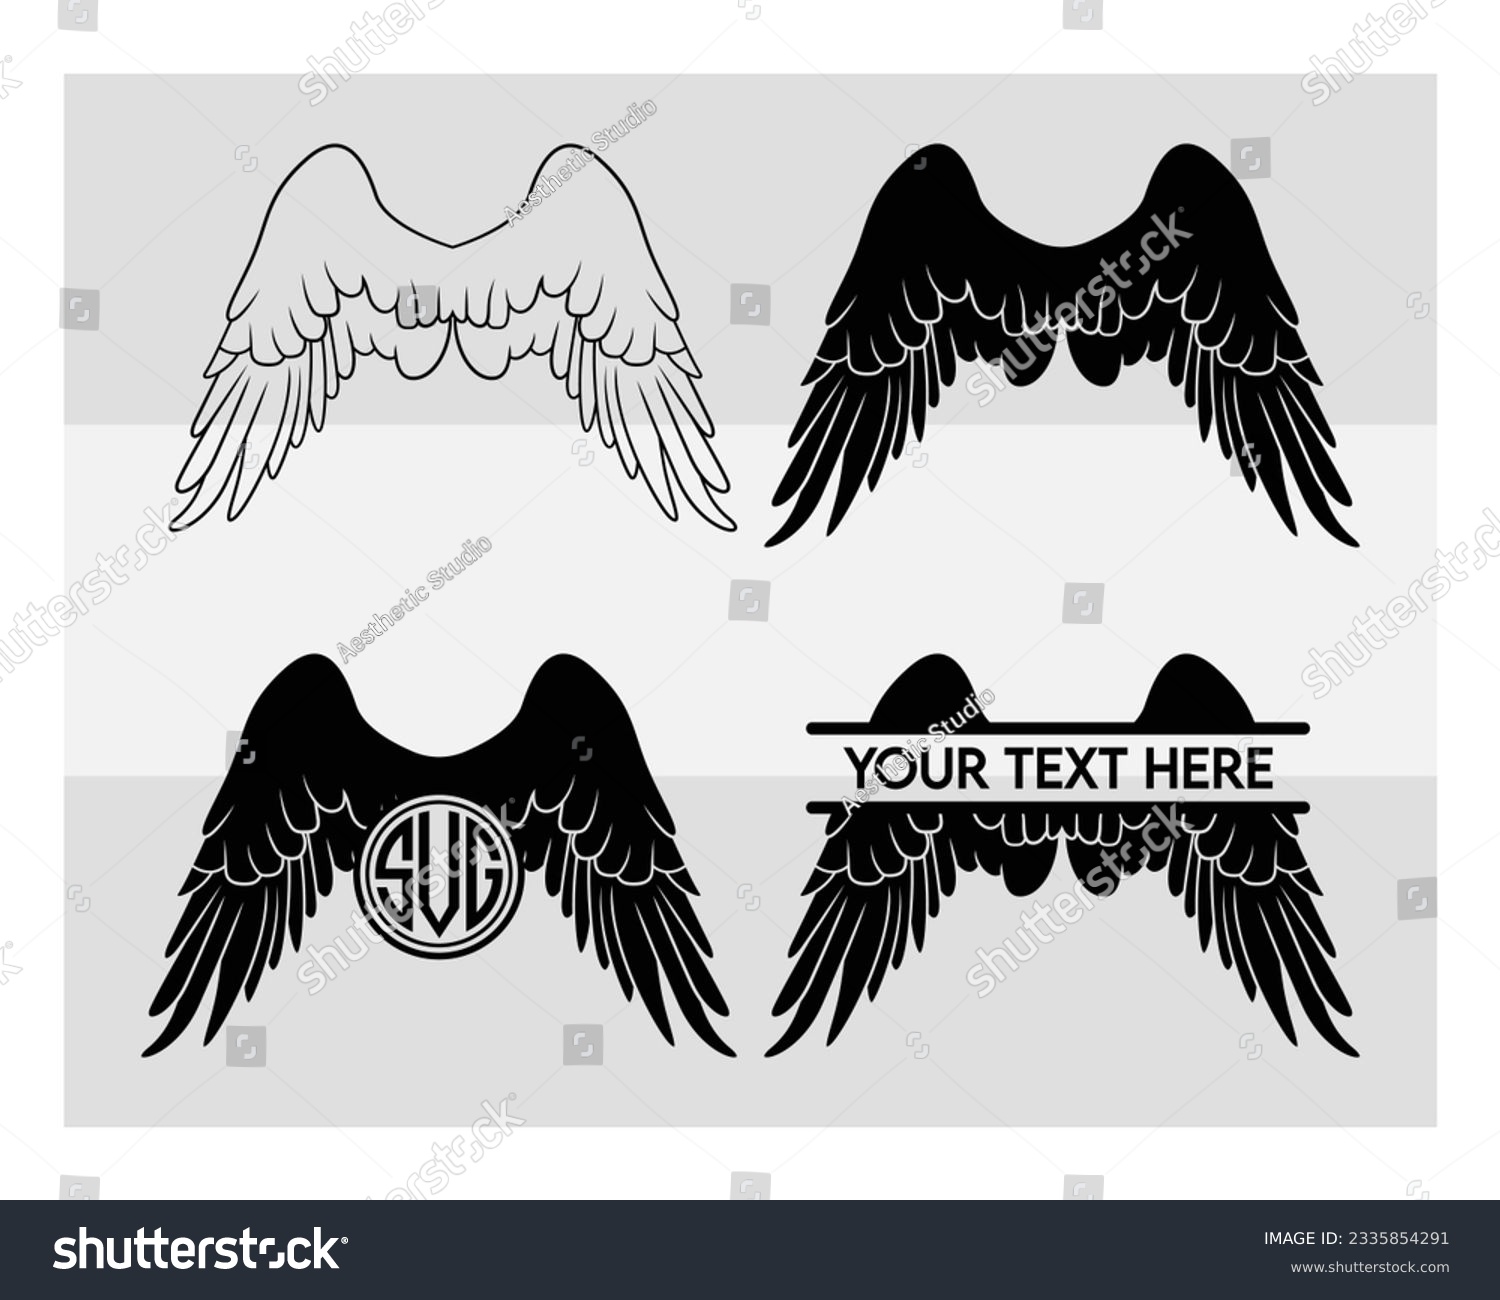 SVG of Angel Wings Svg, SVG Bundle, Angel Wings, Angel Clipart Svg, Circut Cut Files Silhouette, Memoria, Heart Svg, Silhouette, Angel Wing Clipart, Vcetor, Outline, Eps, Cut file svg